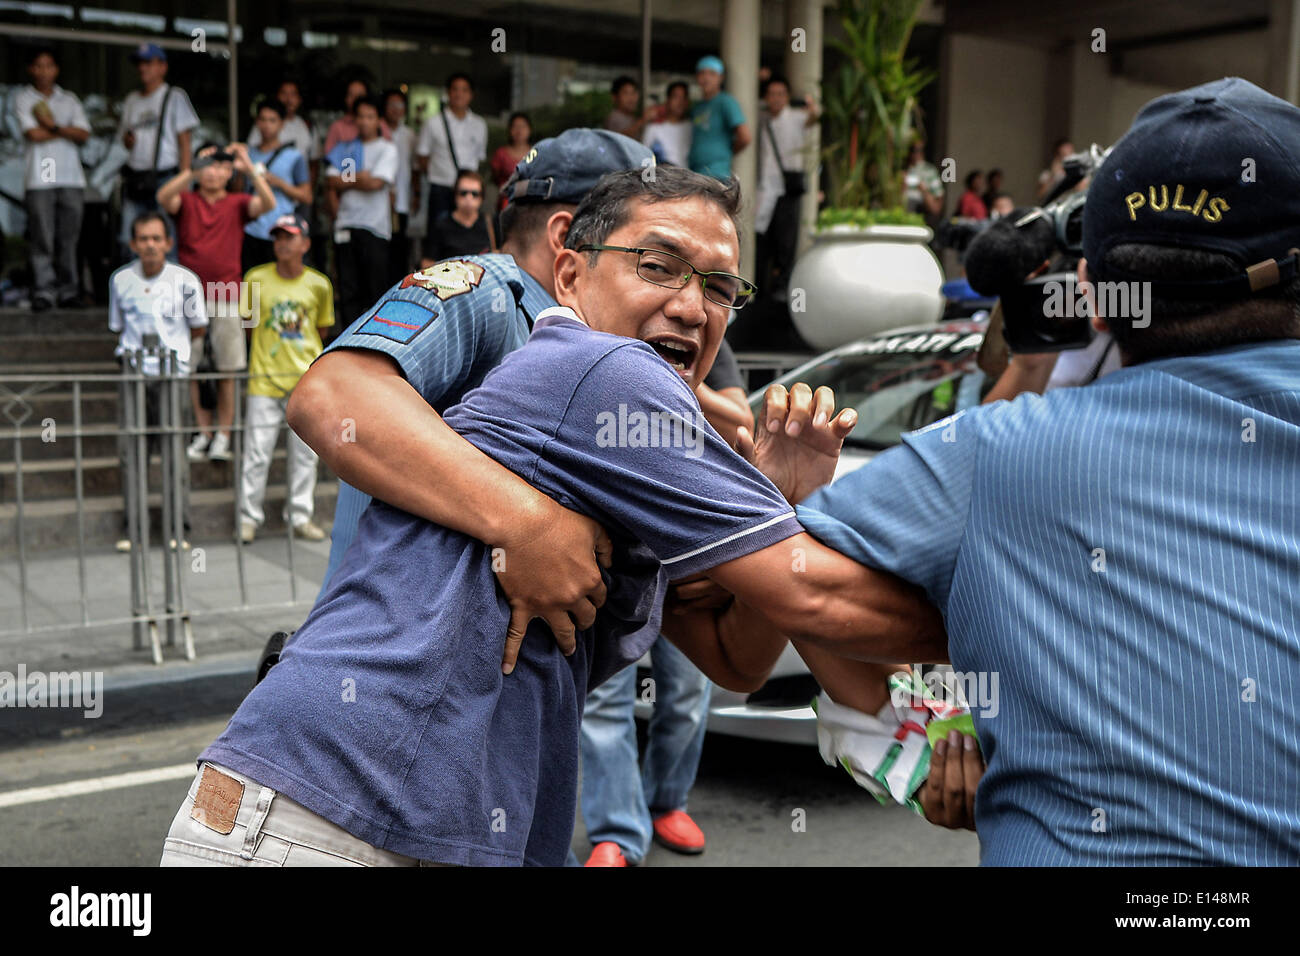 Makati, Philippines. 22nd May, 2014. Policemen attempt to arrest former congressman and activist Teddy Casino during a protest near the venue of the World Economic Forum on East Asia at the financial district of Makati, south of Manila, Philippines, May 22, 2014. Demonstrators criticized the Philippine government for allegedly hiding the worsening poverty and rampant corruption in the country as it welcomes foreign leaders and business heads during Asia's version of the World Economic Forum.Photo: Ezra Acayan/NurPhoto Credit:  Ezra Acayan/NurPhoto/ZUMAPRESS.com/Alamy Live News Stock Photo